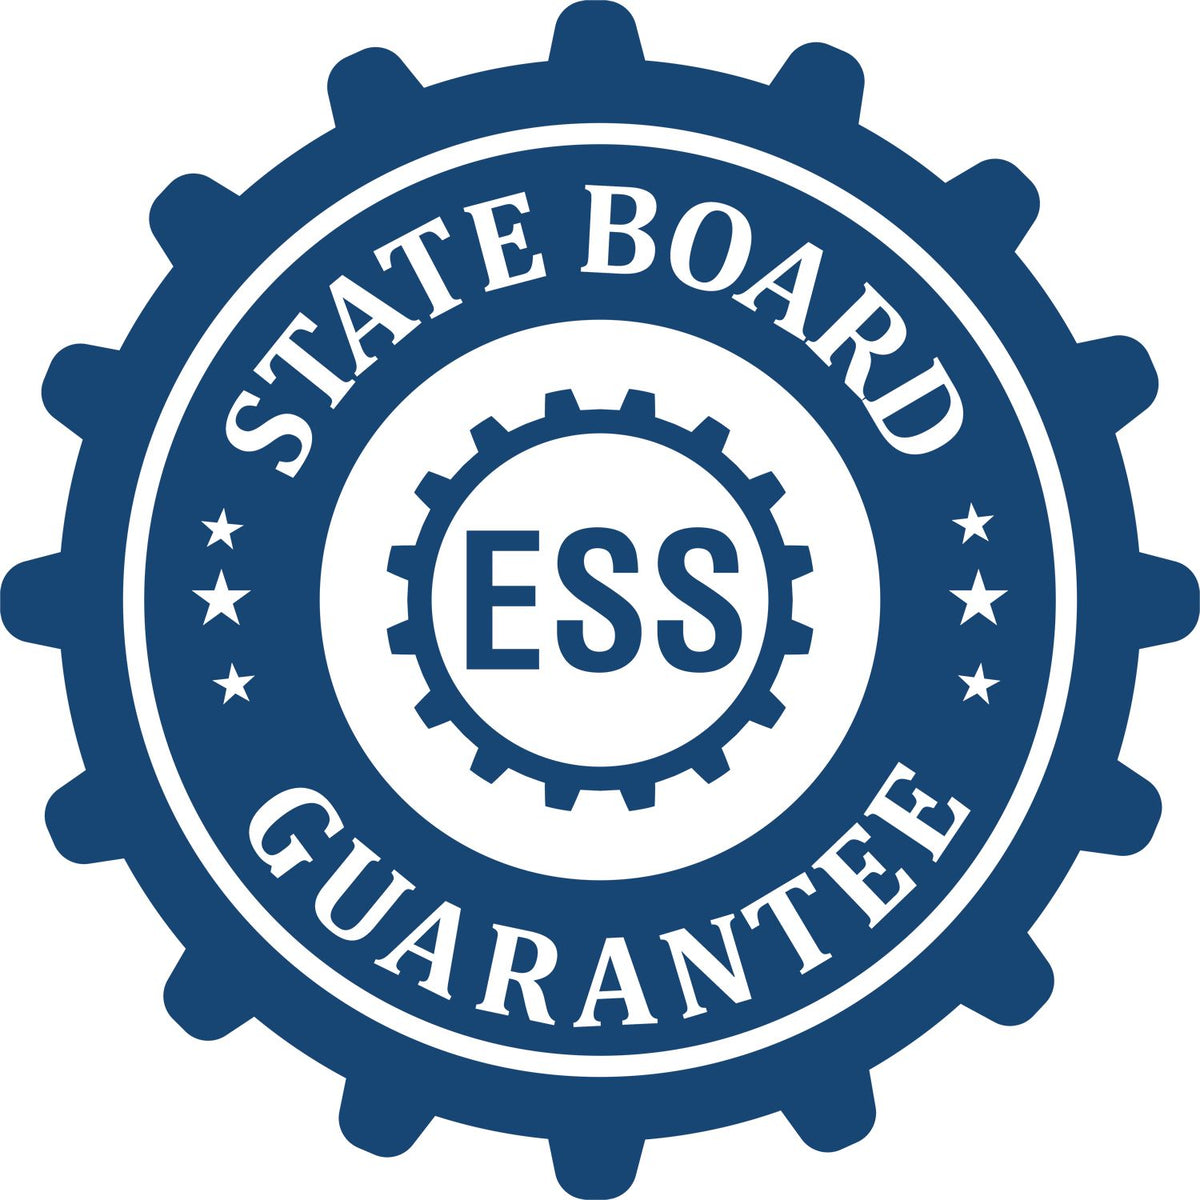 An emblem in a gear shape illustrating a state board guarantee for the New Mexico Desk Architect Embossing Seal product.